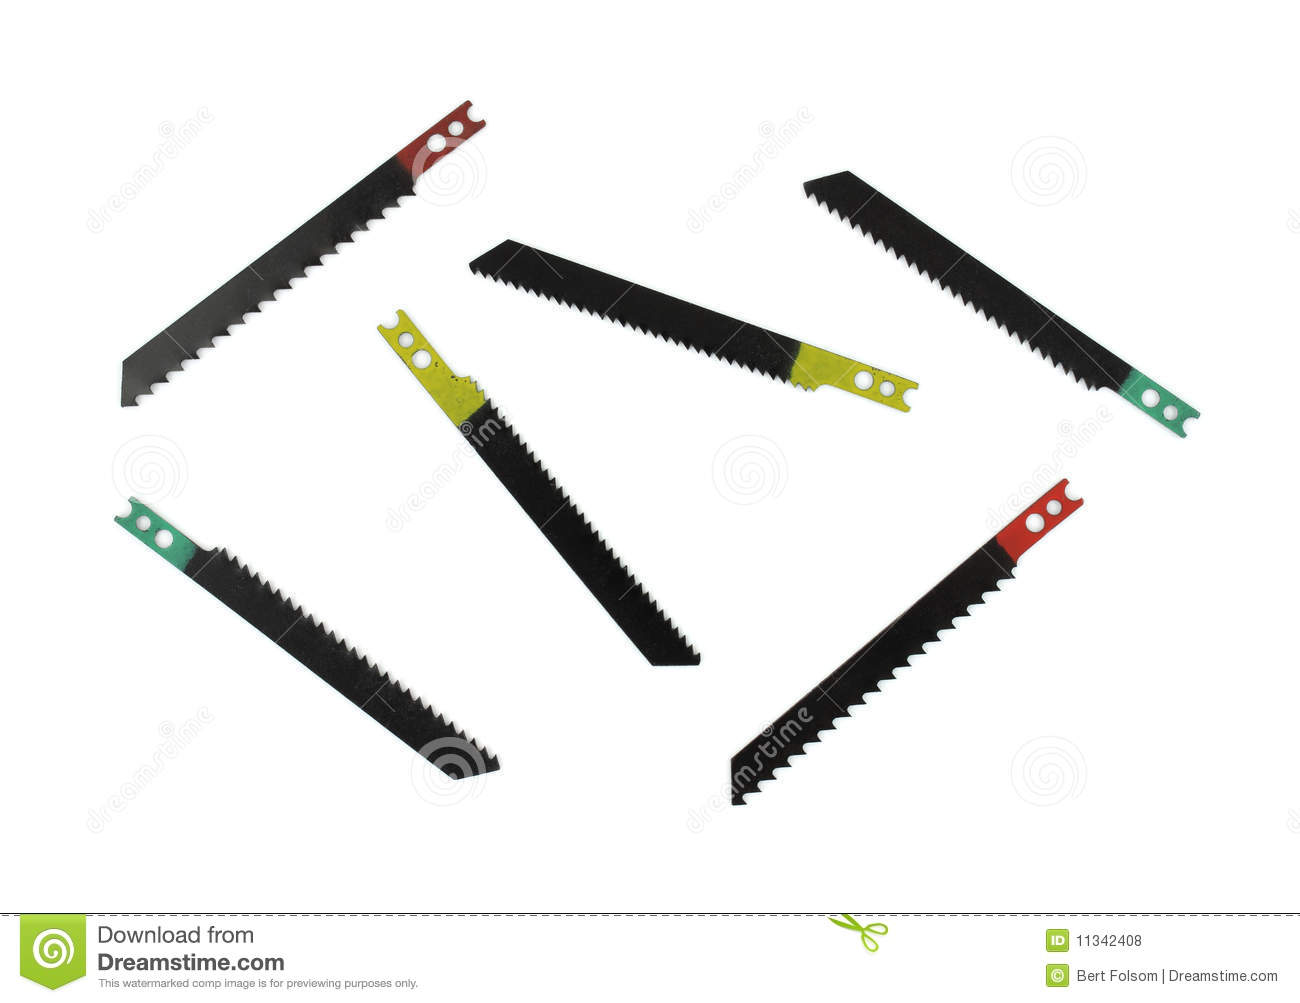 Assorted Old Sabre Saw Blades Royalty Free Stock Photos   Image